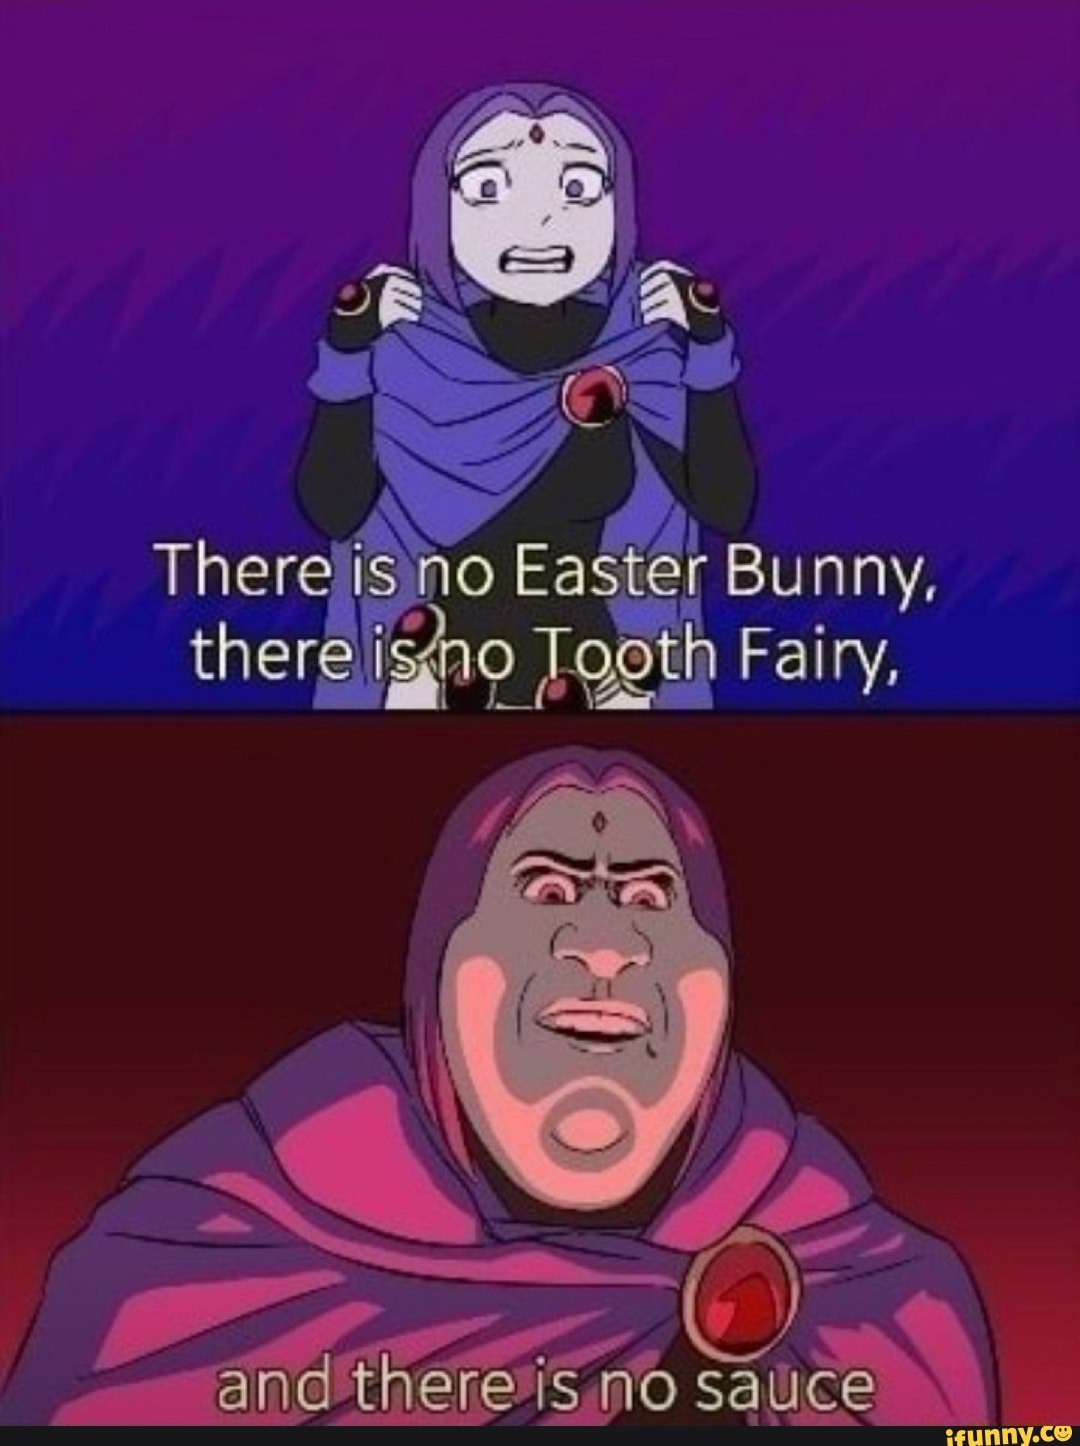 there-is-no-easter-bunny-there-tooth-fairy-if-and-there-is-no-sauce